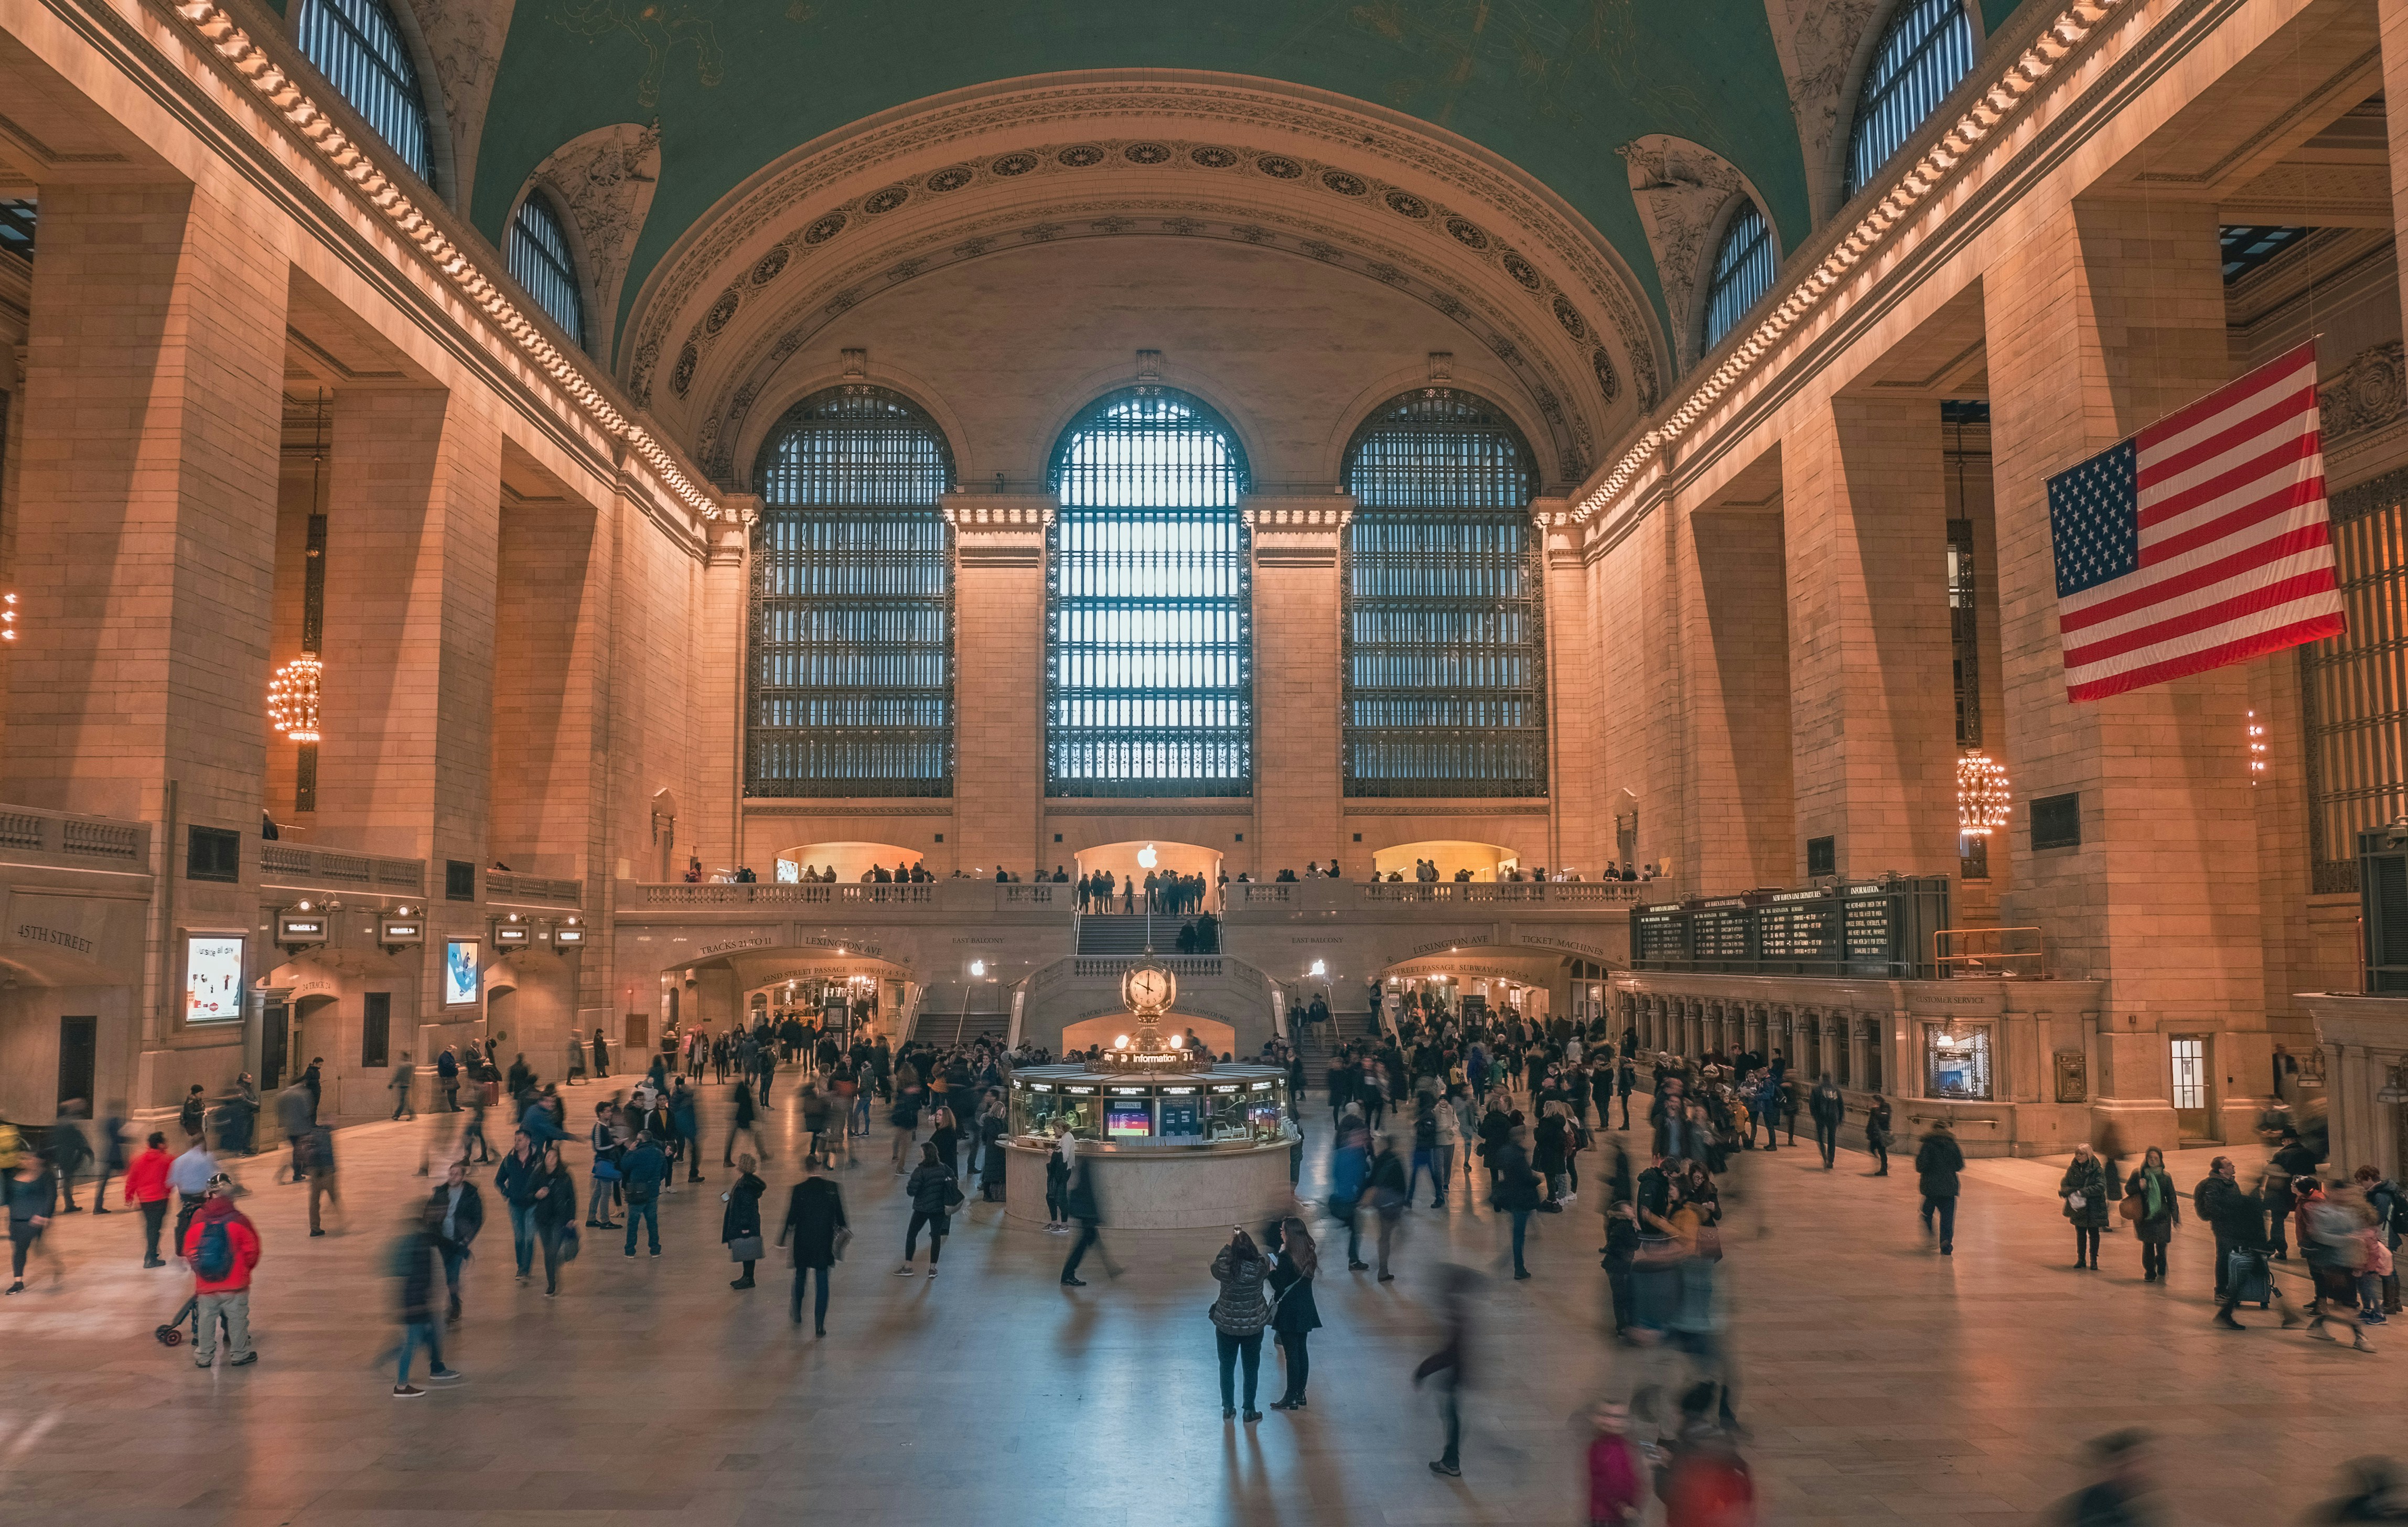 Choose from a curated selection of New York photos. Always free on Unsplash.